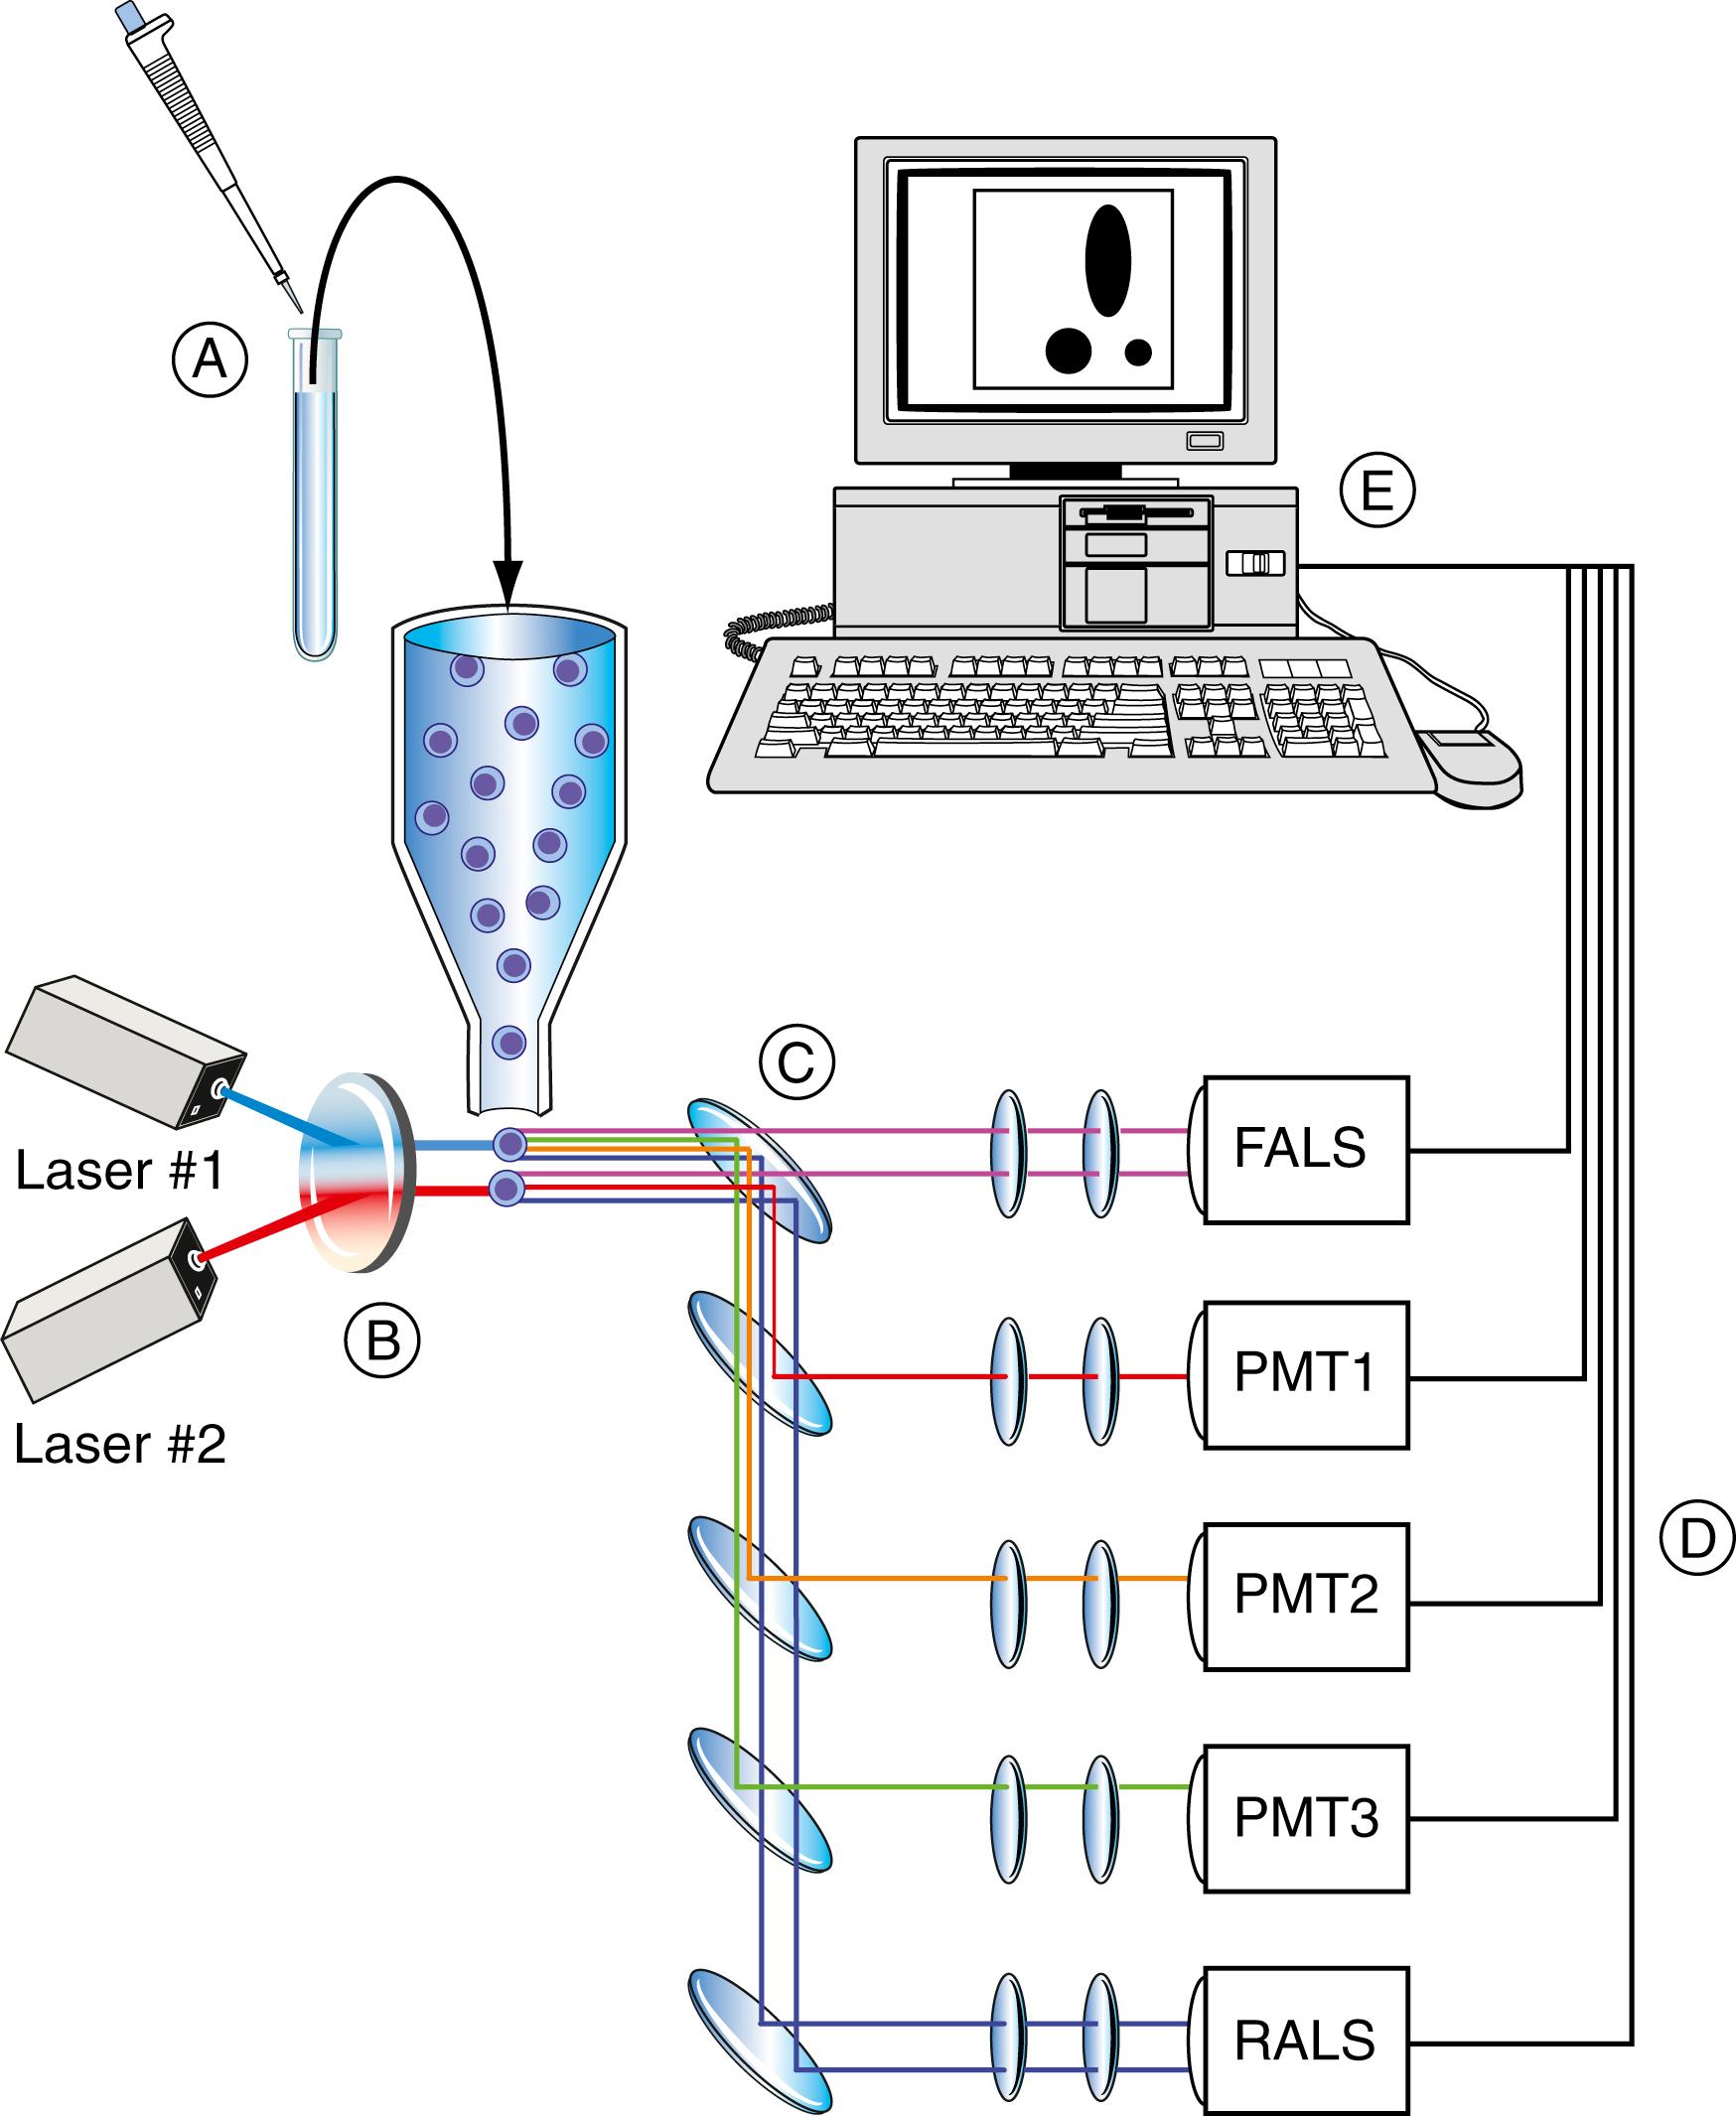 Figure 46.3, Structural components and function of the flow cytometer. A, Fluorochrome-labeled monoclonal antibody solutions are added to a cell suspension from peripheral blood, bone marrow aspirate, or a lymph node. The tubes are incubated at room temperature for a short period of time. B, Labeled cell suspensions are passed through the flow cell of a flow cytometer. Many flow cytometers are automated, but some models require the operator to process the tubes individually. More than 10,000 cells from each tube are typically analyzed to produce statistically valid information. C, Each cell passes individually through the highly focused laser beam of the flow cytometer, a process termed single-cell analysis . The fluorochrome of each labeled monoclonal antibody attached to the cell is excited by the laser light and emits light of a certain wavelength. The cells also scatter light at multiple angles. Photodetectors placed at forward and right angles to the axis of the laser beam collect the emitted or scattered light (photomultiplier tubes, PMT). Forward-angle light-scatter signals (FALS) and right-angle scatter signals (RALS), and as many as five fluorochrome signals, can be detected from each cell (multiparametric analysis). D, The signals from each photodiode are digitized and passed to a computer for storage, display, and analysis. Typically, all data recorded from each cell are stored for possible later recall for further analysis (list mode data storage). E, A variety of histograms for visual display can be generated automatically or at the discretion of the operator. List mode data can also be transferred to a separate computer for analysis. Presently, most commercial flow cytometers utilize a standardized file format for list mode storage, and a variety of computer programs are commercially available for data analysis and display.